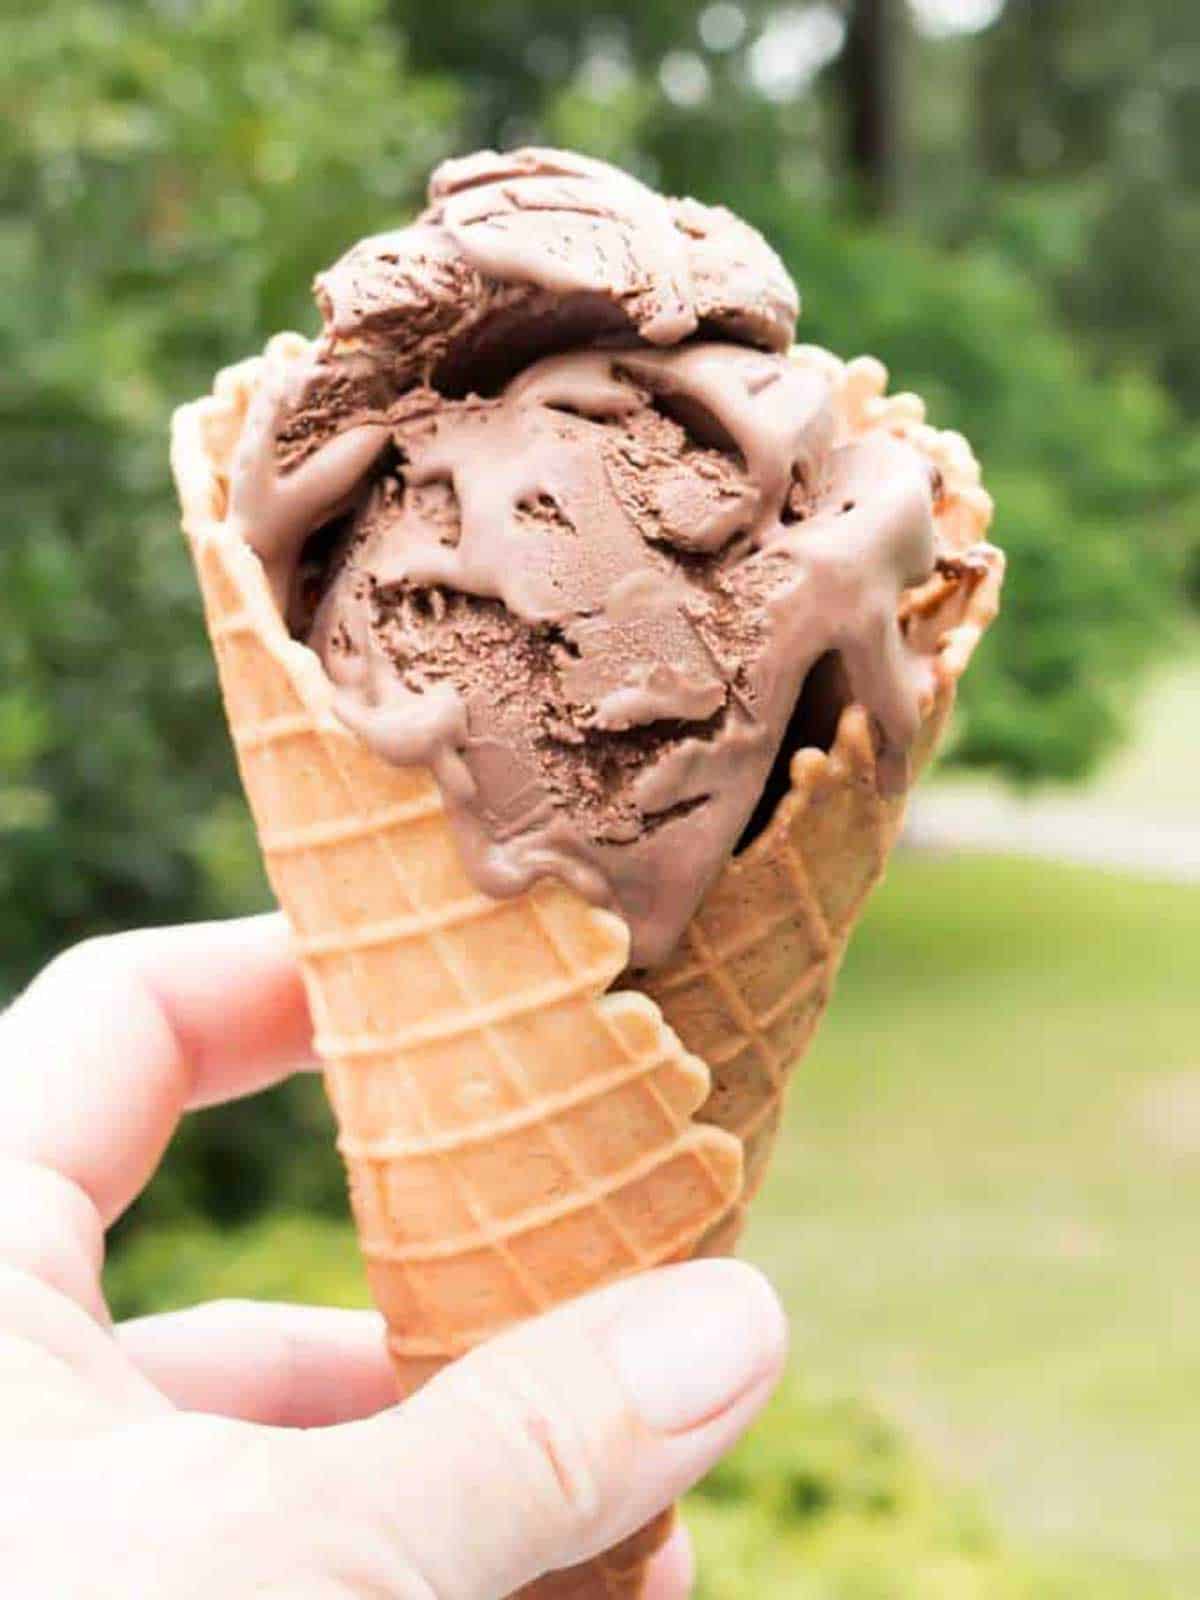 Chocolate Ice Cream in a waffle cone.